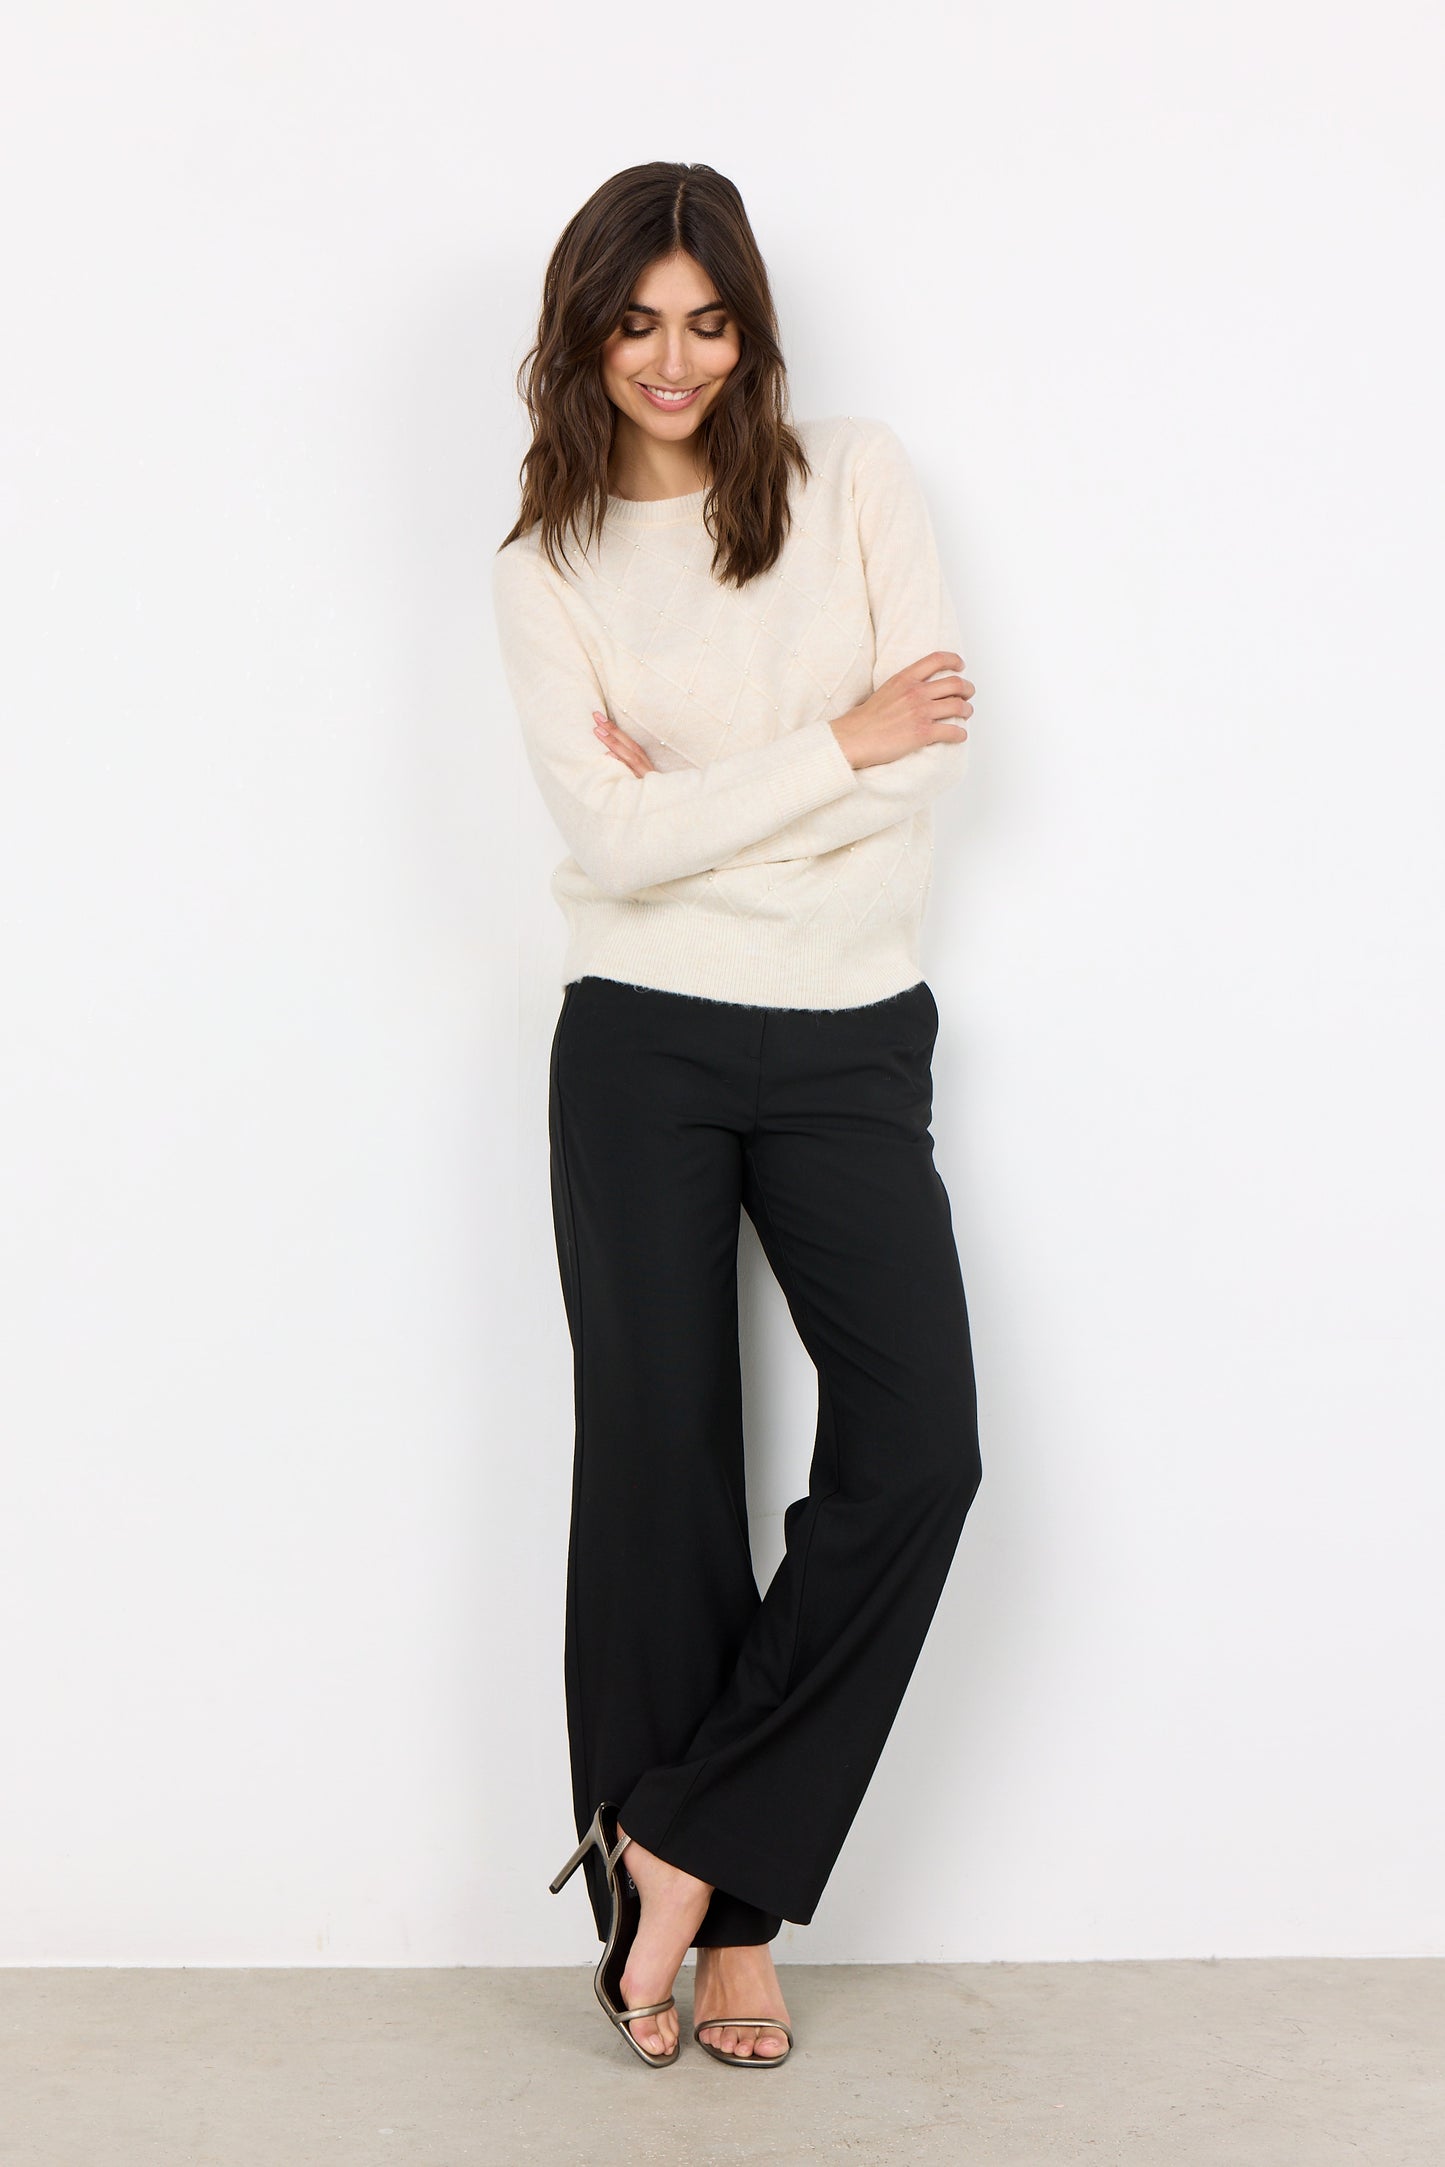 SOYA CONCEPT NESSIE 55 Cream Pearl Knit